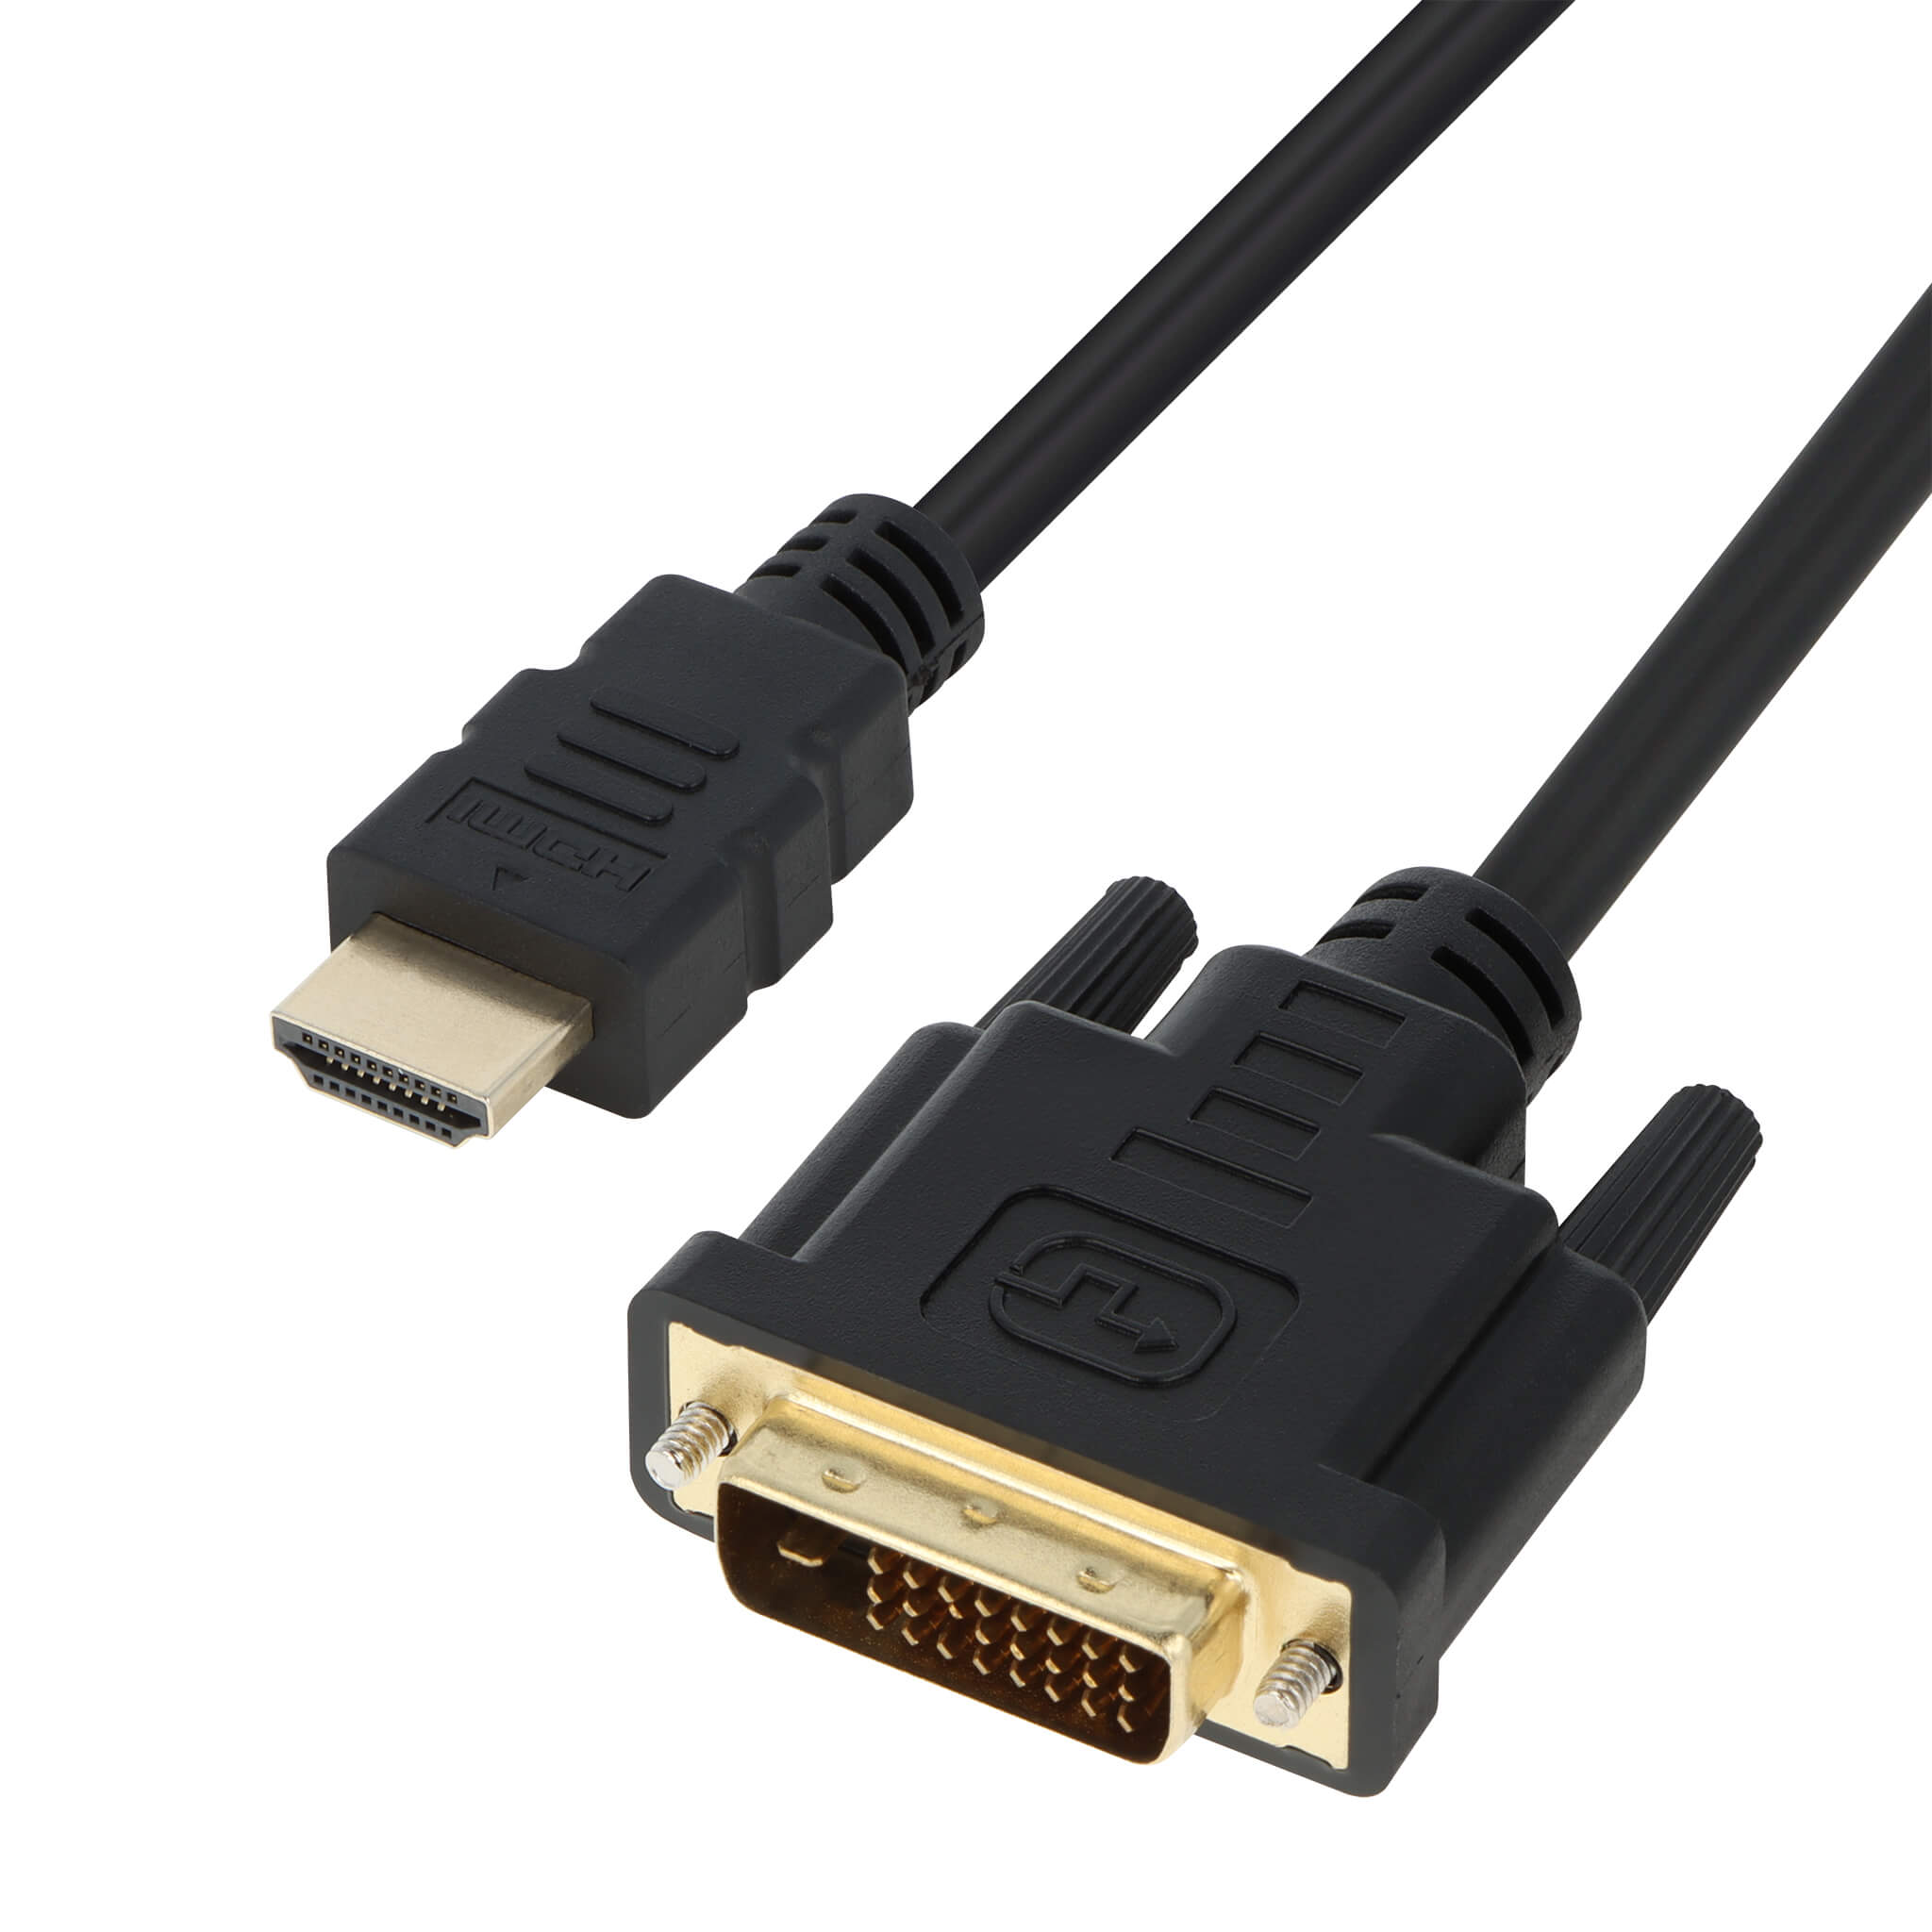   Basics HDMI A to DVI Adapter Cable, Bi-Directional  1080p, Gold Plated, Black, 6 Feet, 1-Pack For Television : Electronics